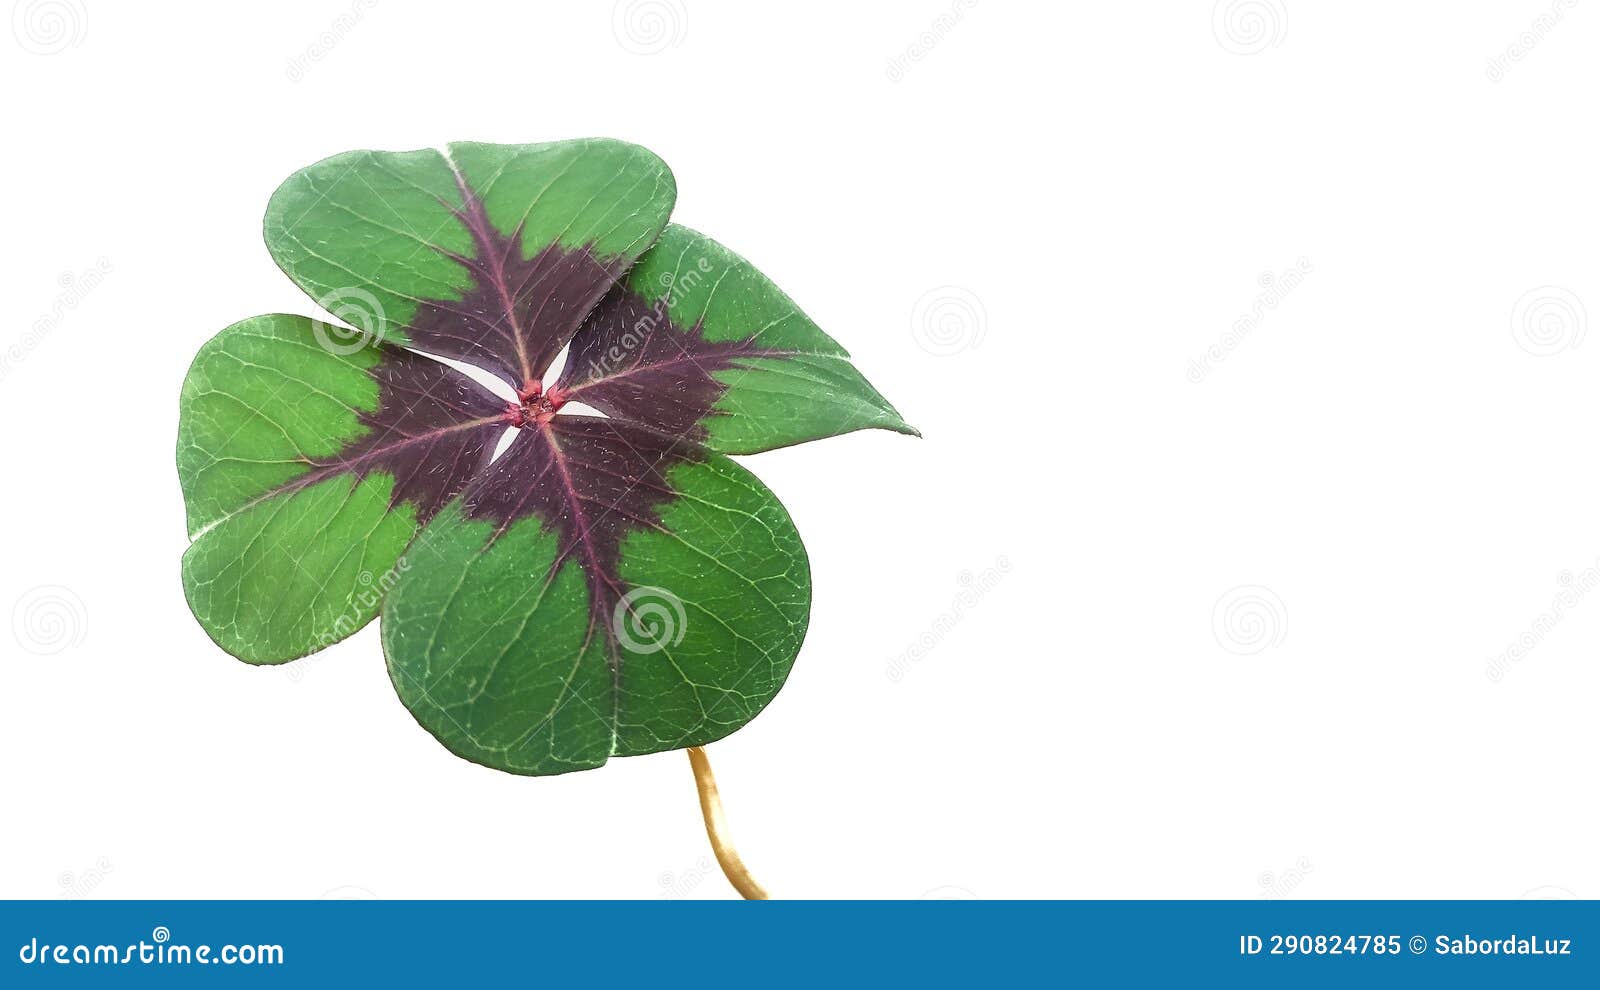 four-leaf clover  in a white background